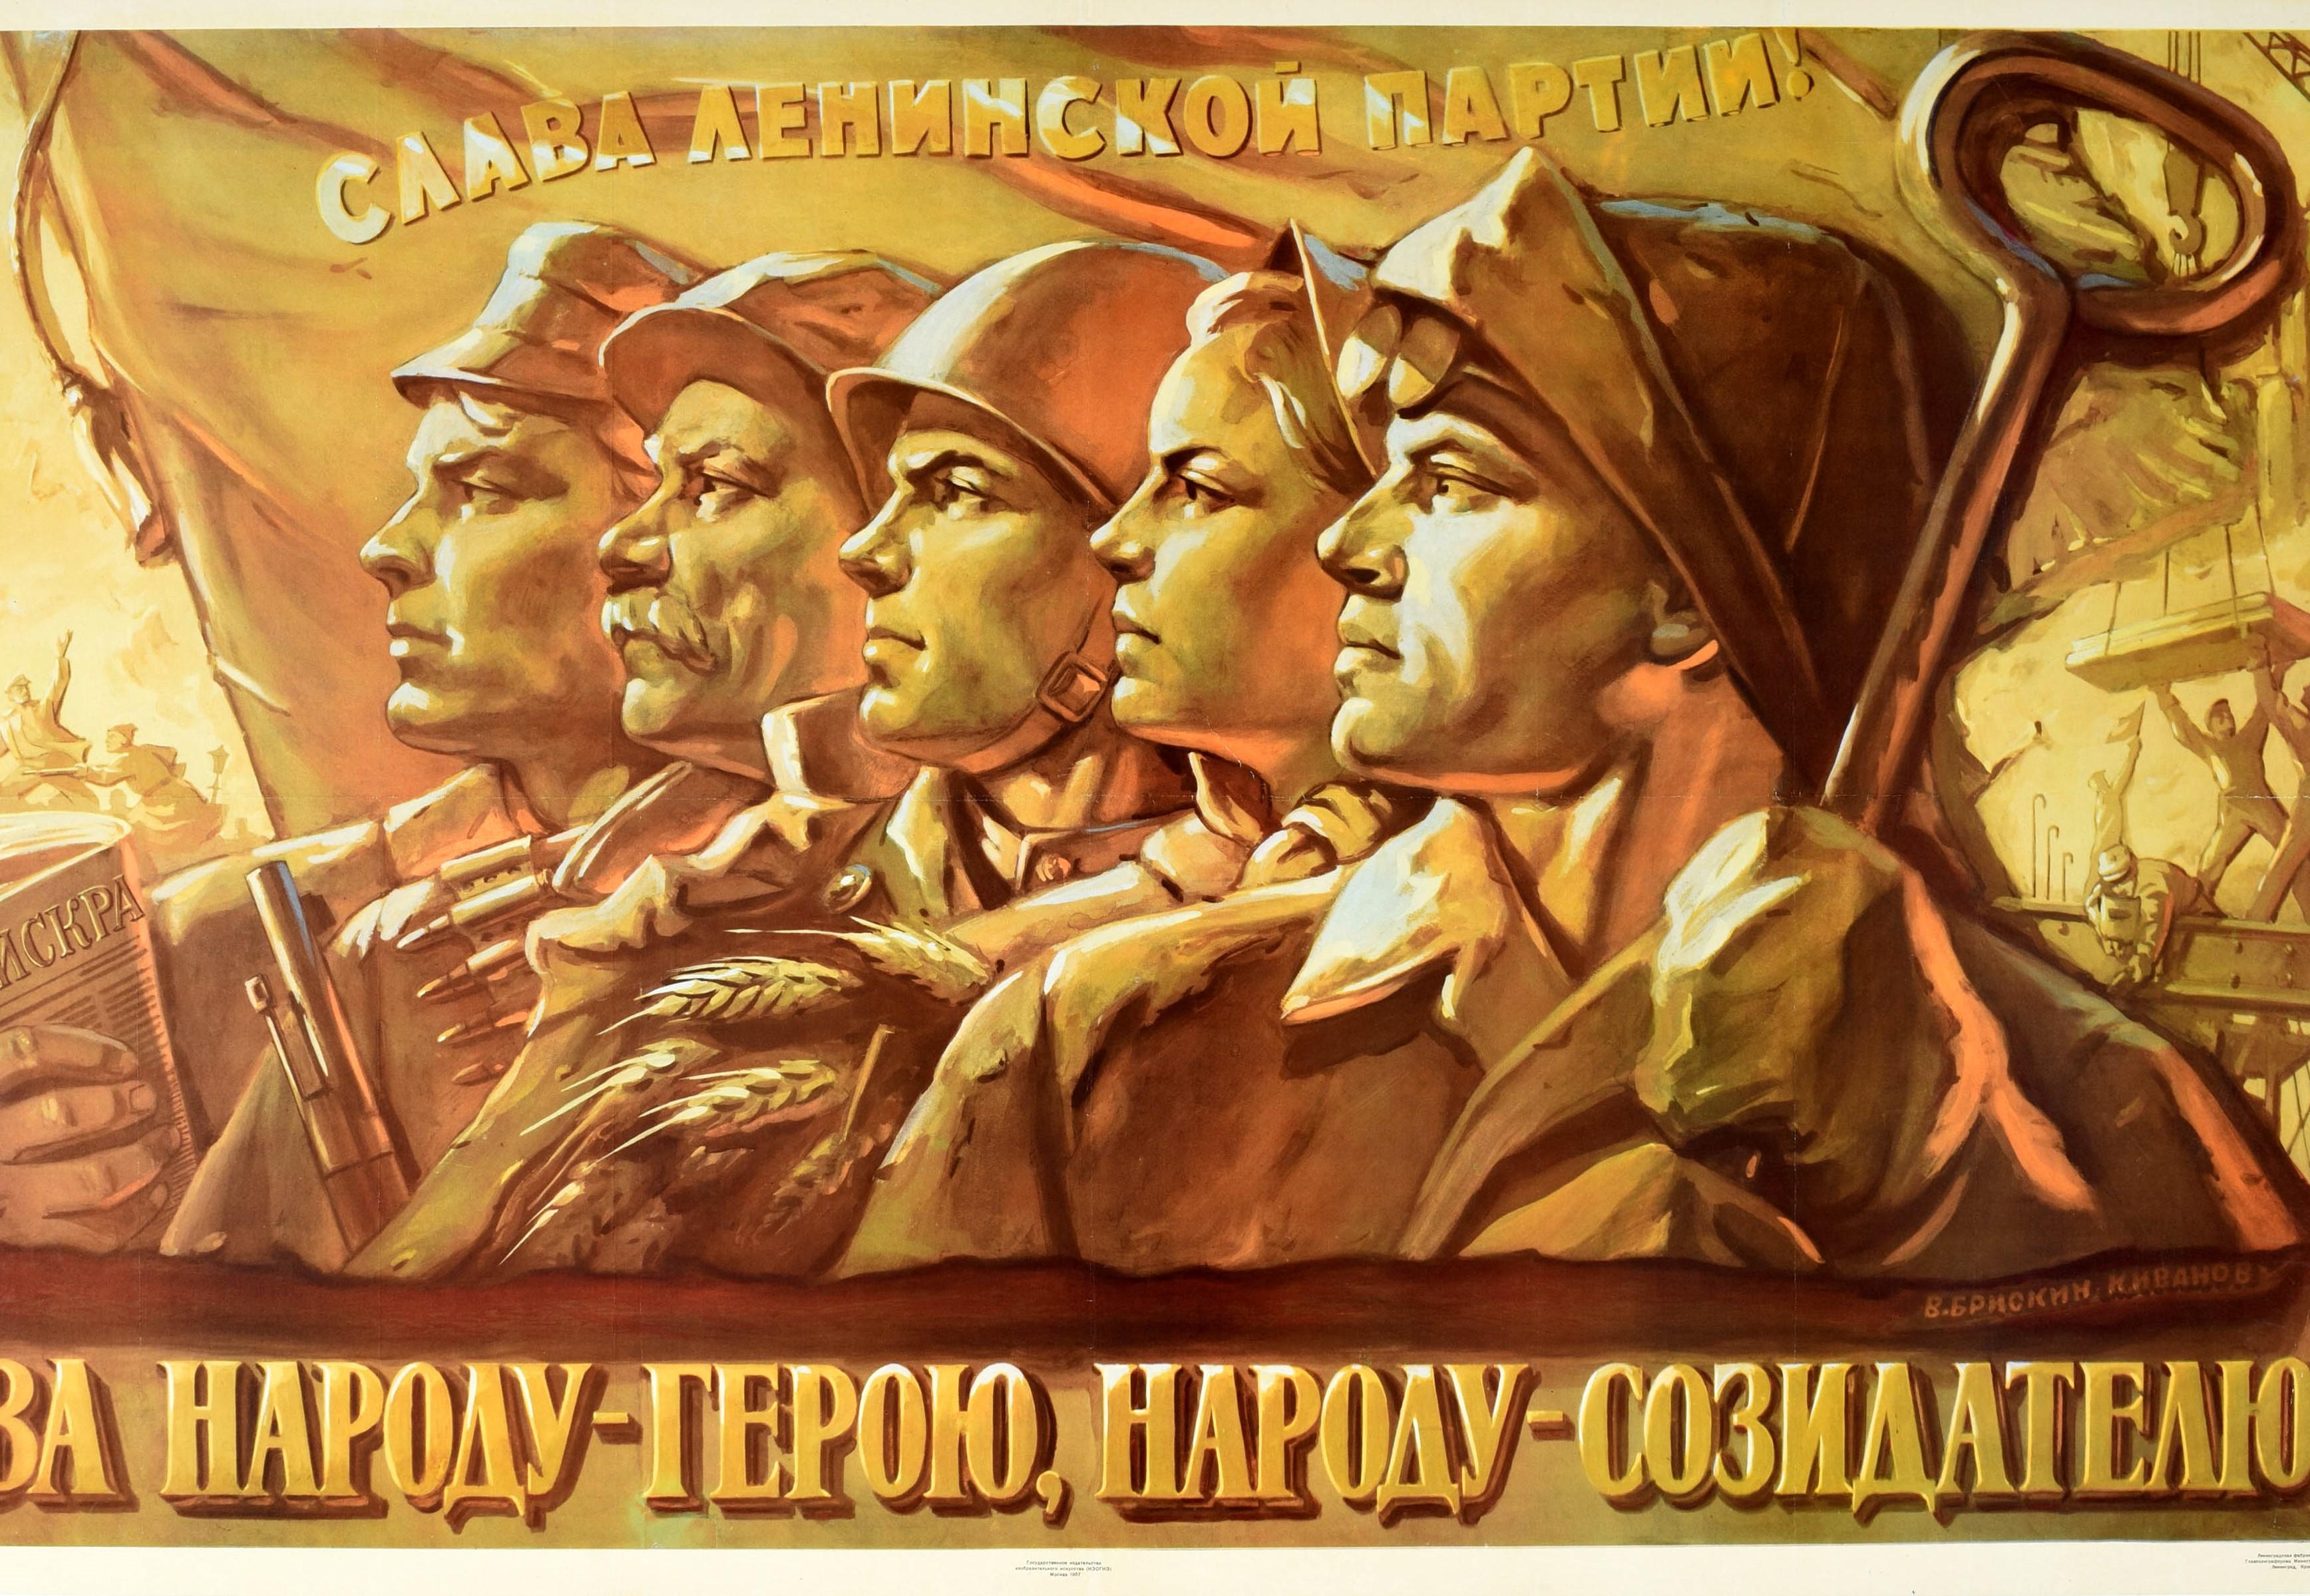 Original vintage Soviet propaganda poster - Glory to the heroes, the creator people! / Слава народу-герою, народу-созидателю! - featuring a row of people in military uniform and workers including a miner, farmer and soldier holding tools, wheat, a